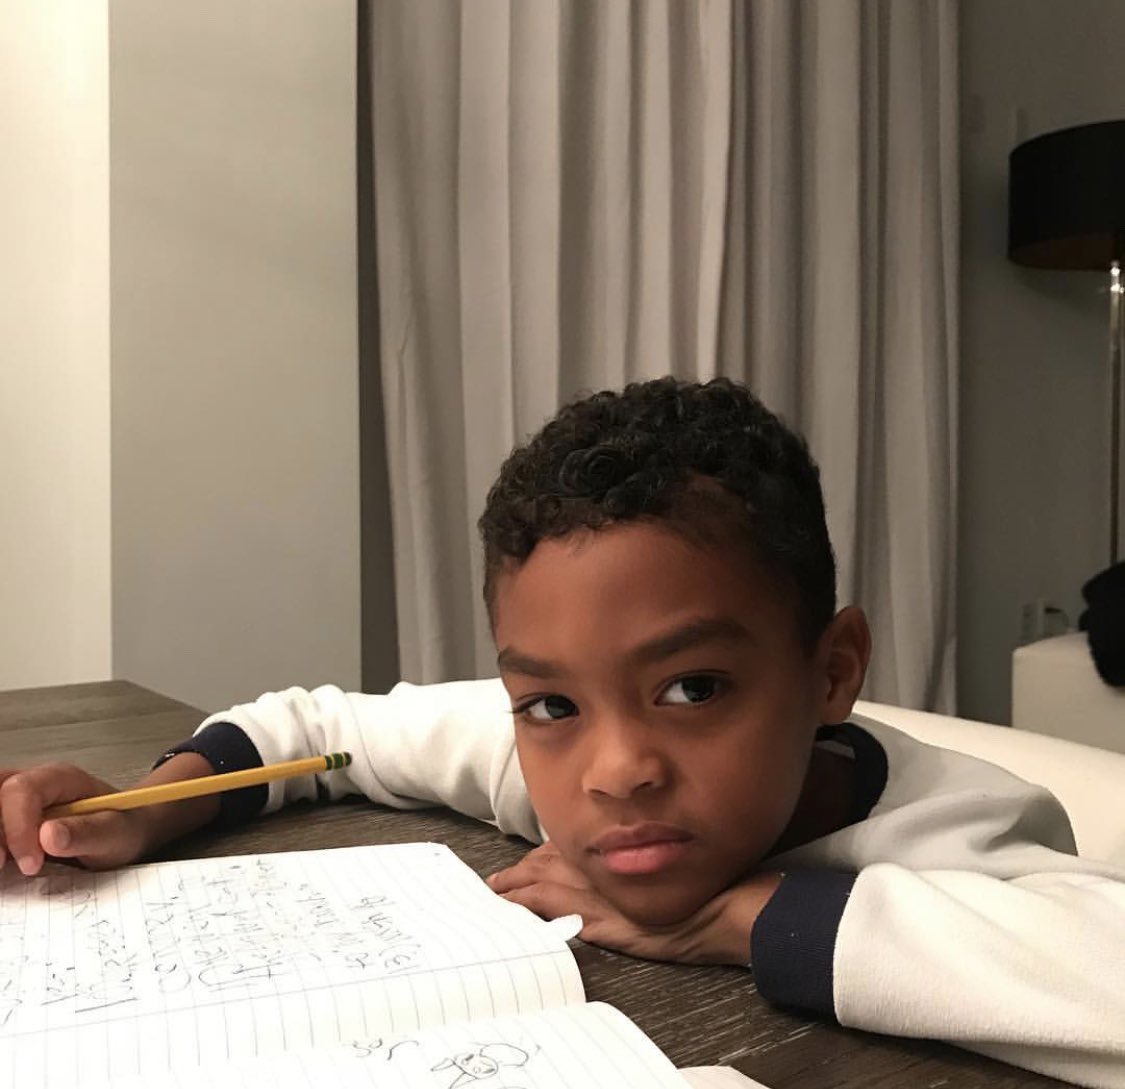 This kid is the best he acts so much like me already. ????????‍♂️my other son 69 is crazy. #lecheminduroi https://t.co/9t1BsT7Hzr